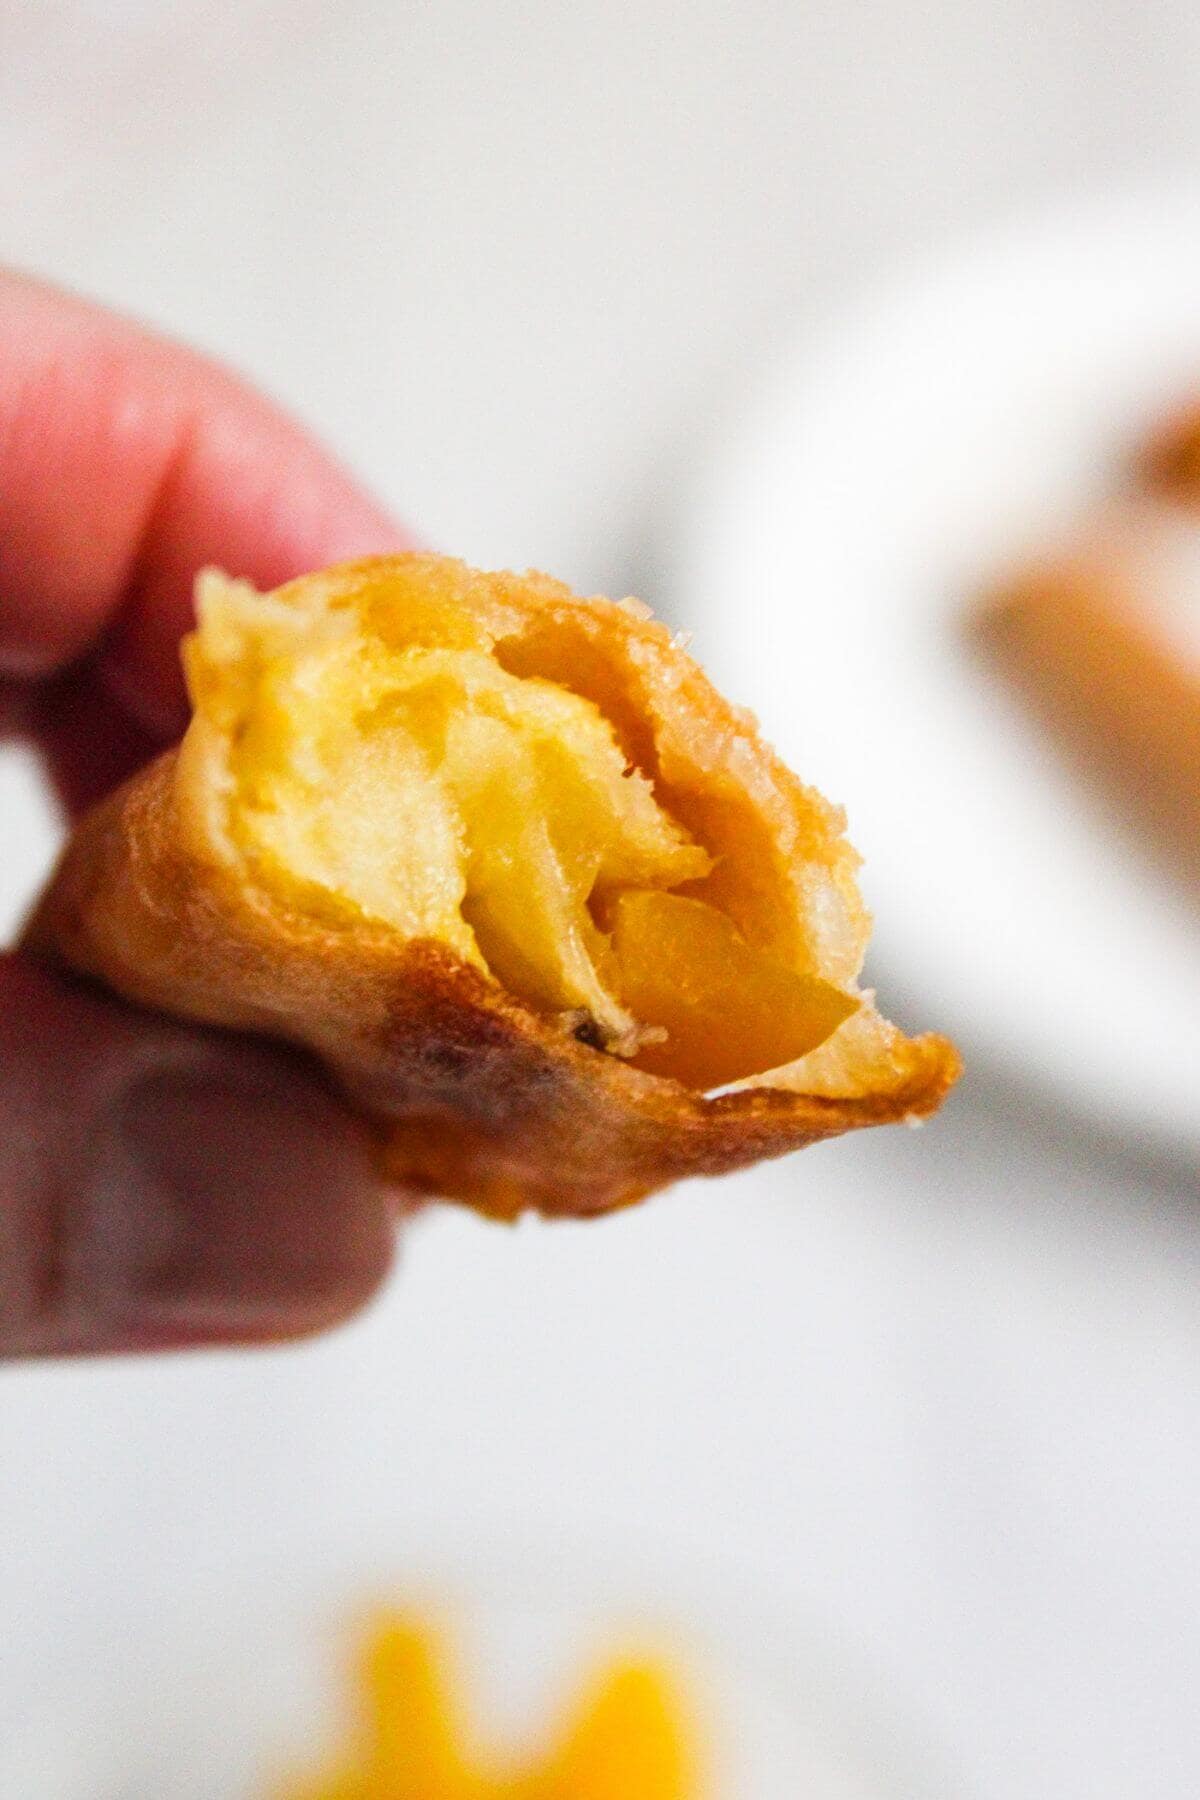 A person holds a piece of a banana turon and shows the inside.